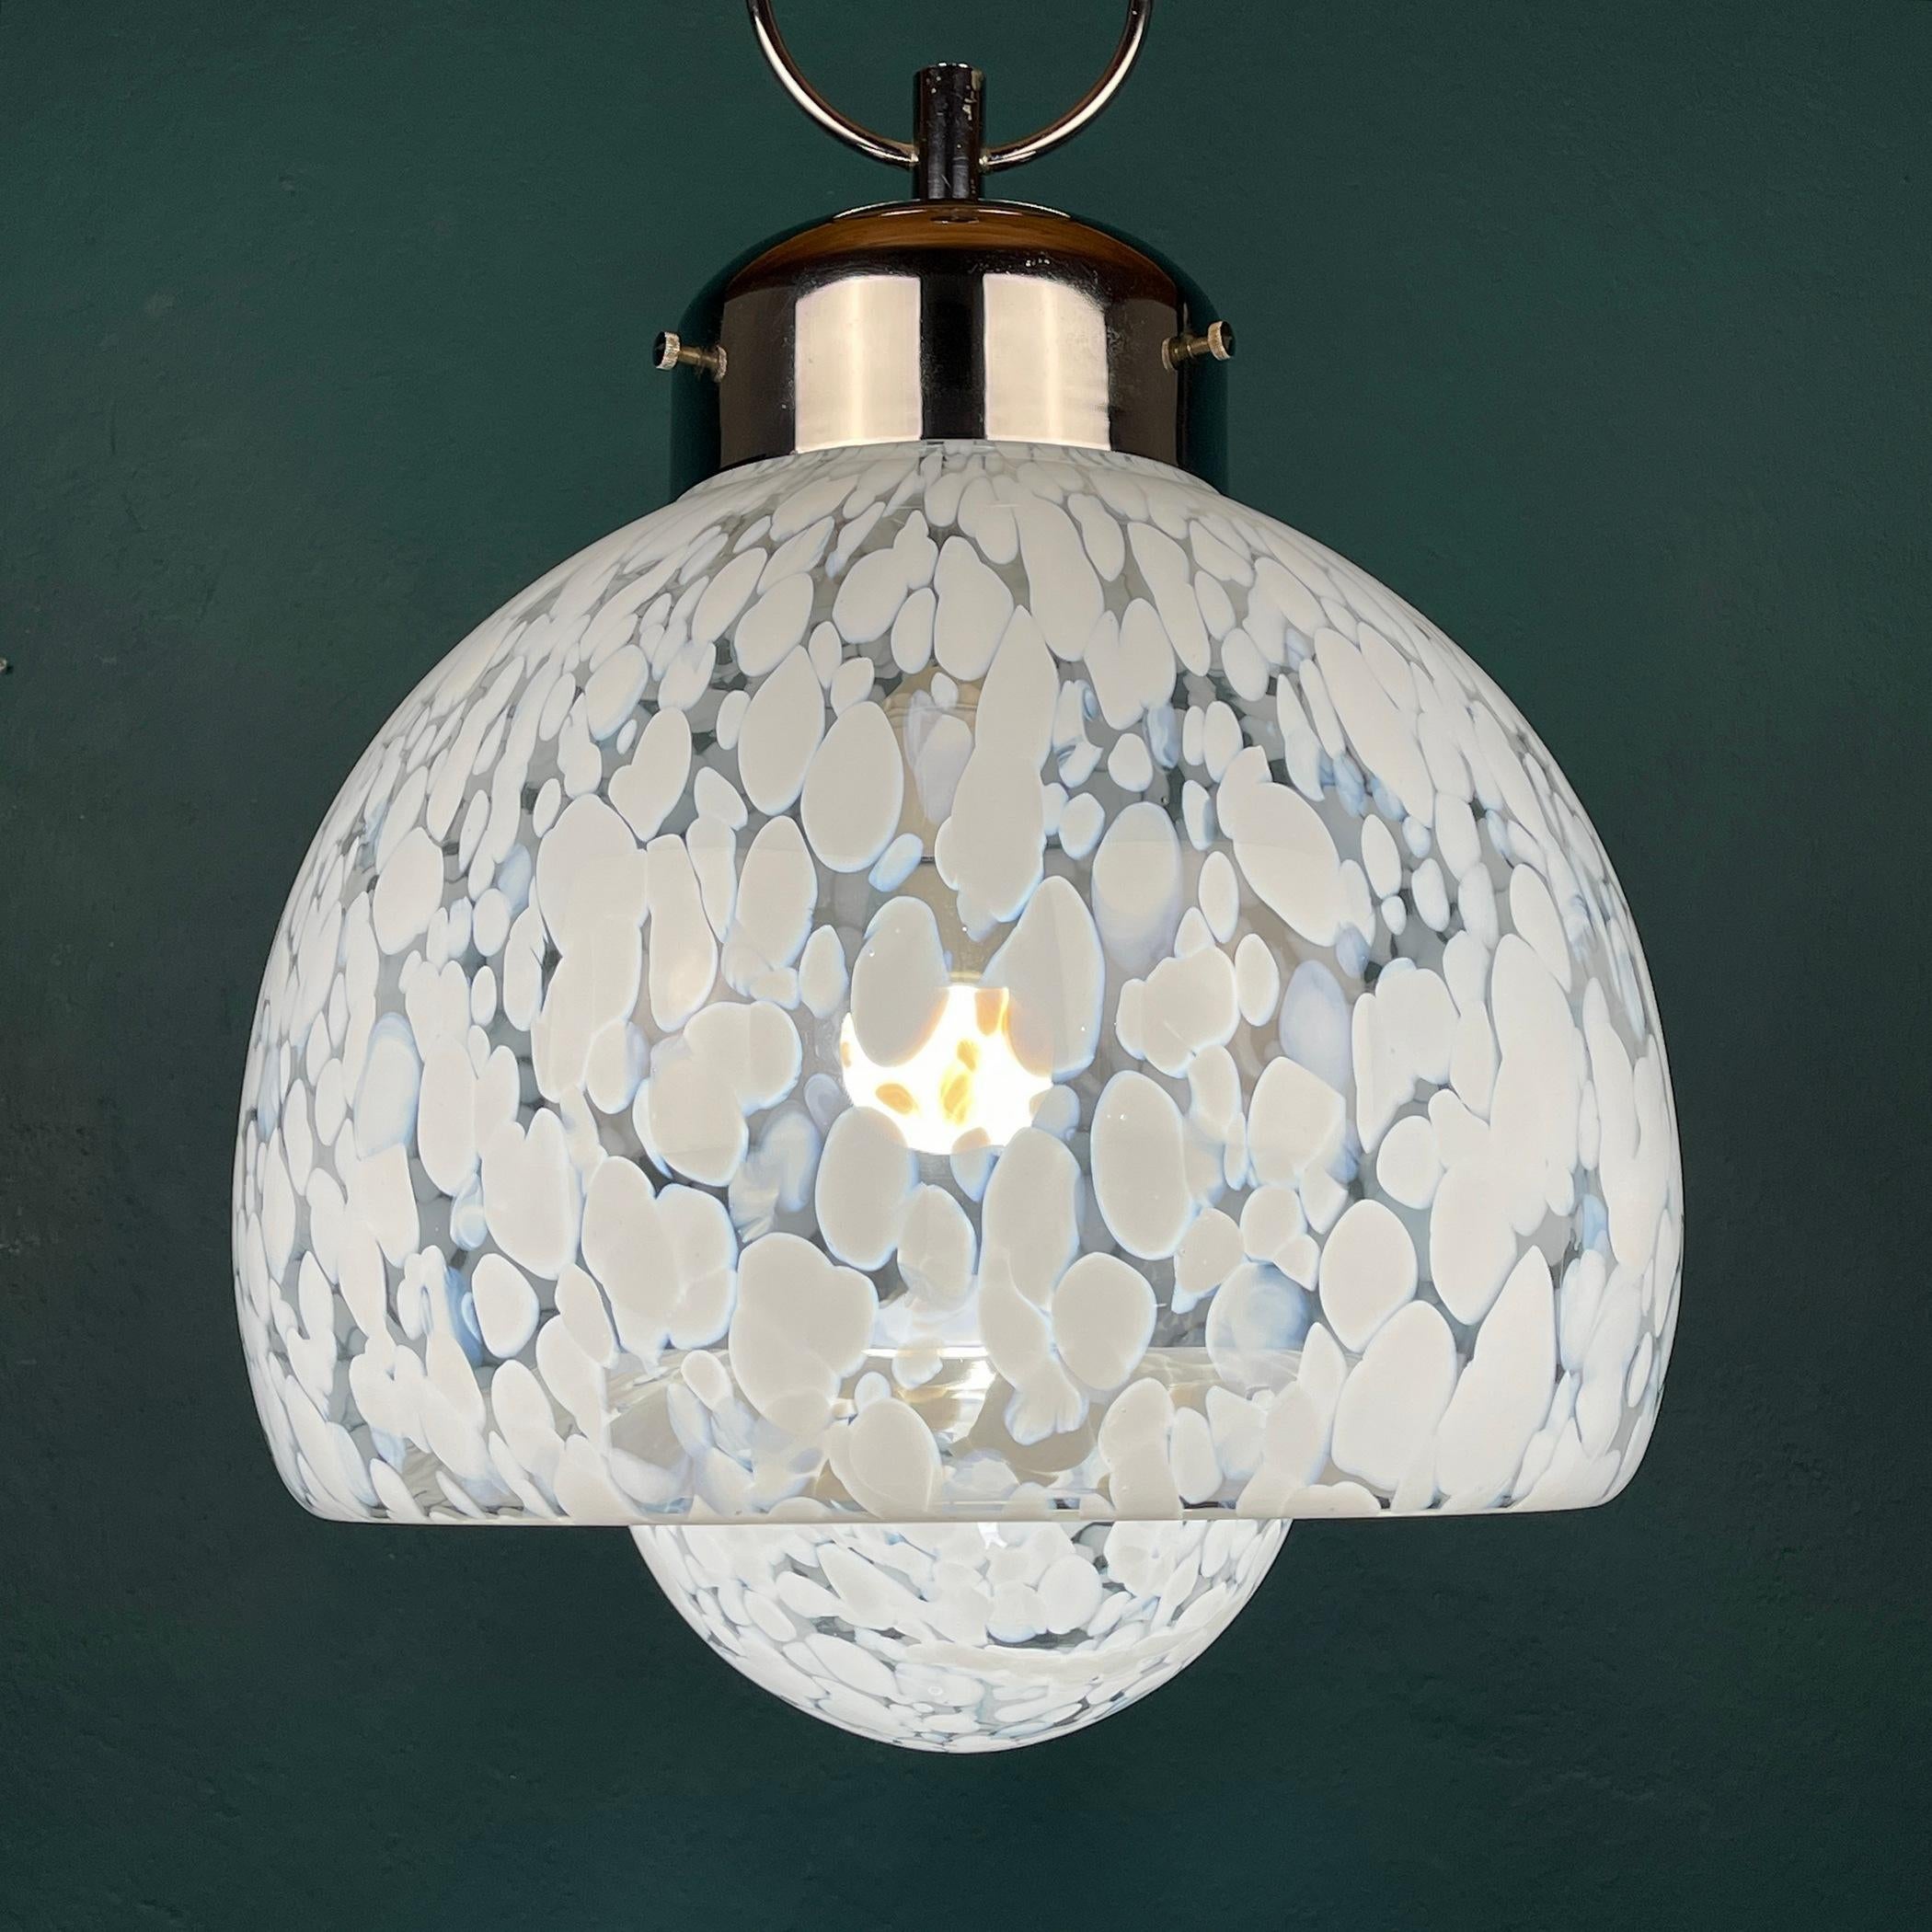 Large pendant lamp in Murano glass in the shape of a mushroom. Made in Italy in the 1960s. Most likely designer Carlo Nason for Mazzega. The merletto (Italian for lace) pattern creates a beautifully soft and bright light. Very good vintage